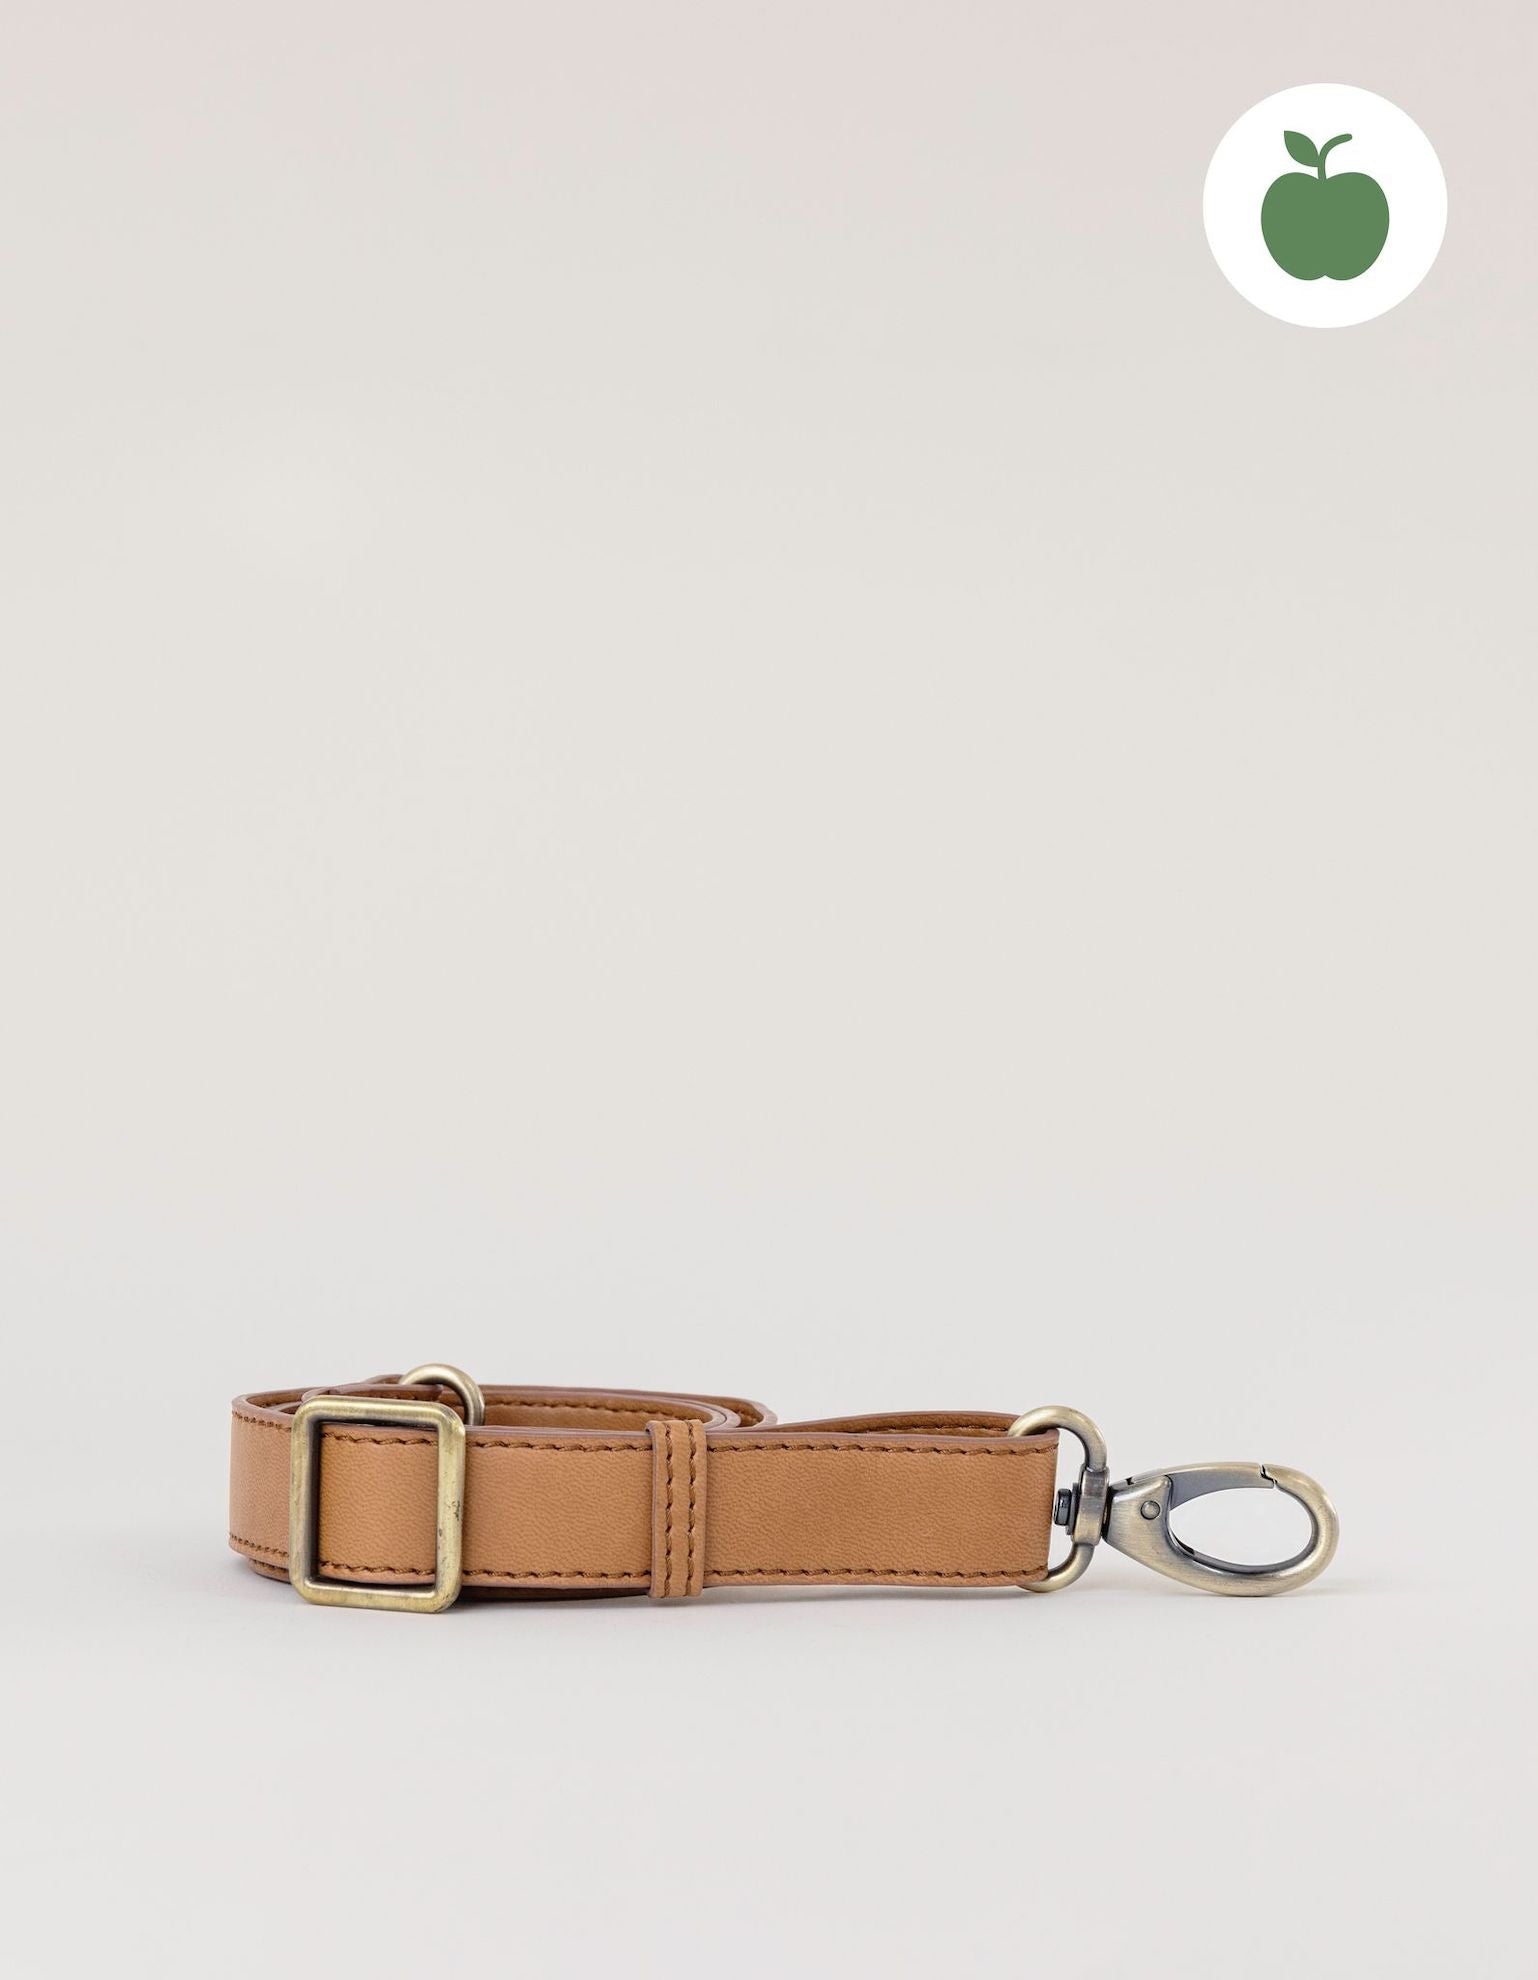 Bum Bag Strap in cognac apple leather. Front product image.